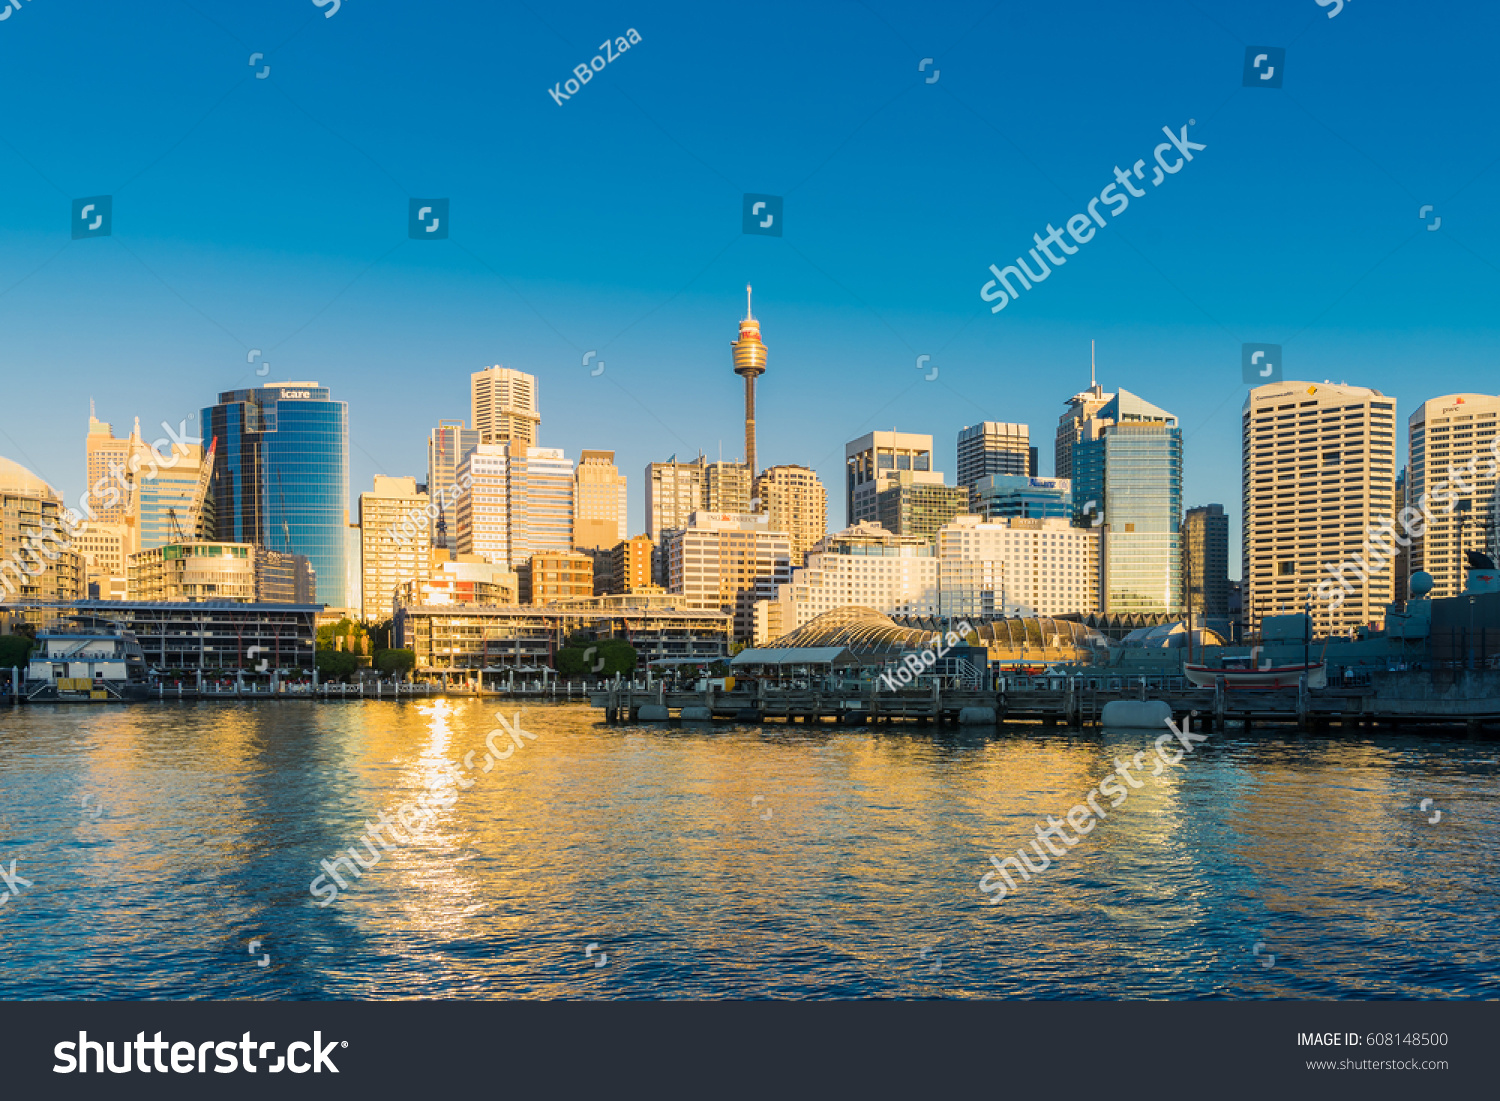 Sydney, Australia - February 20, 2017: View of Pyrmont Bay in Darling Harbour. #608148500